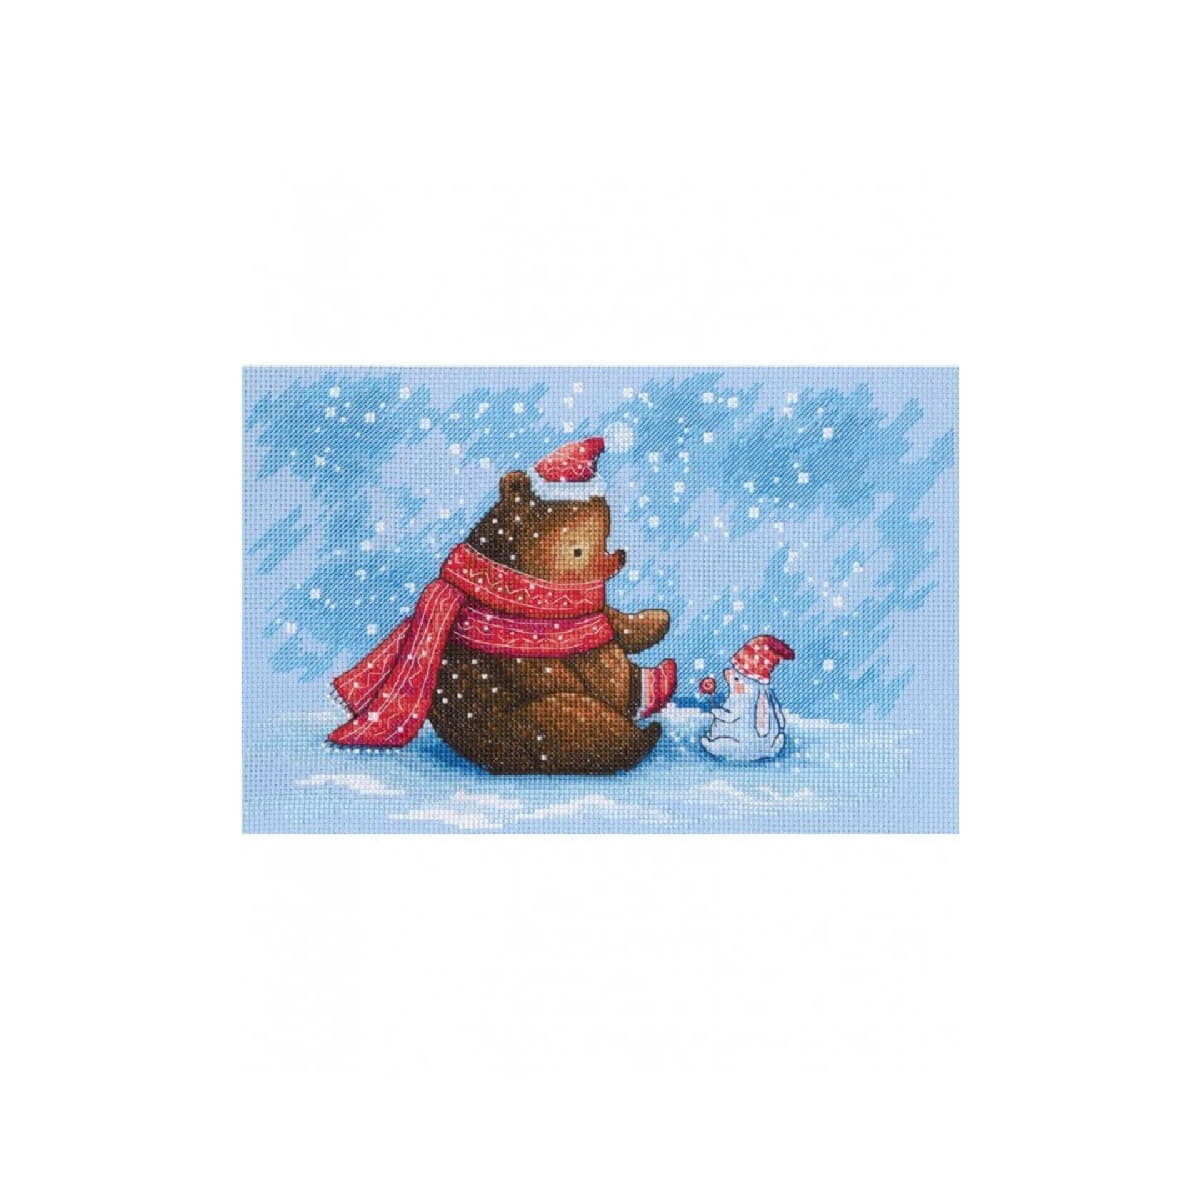 RTO counted cross stitch kit "Time to warm your...